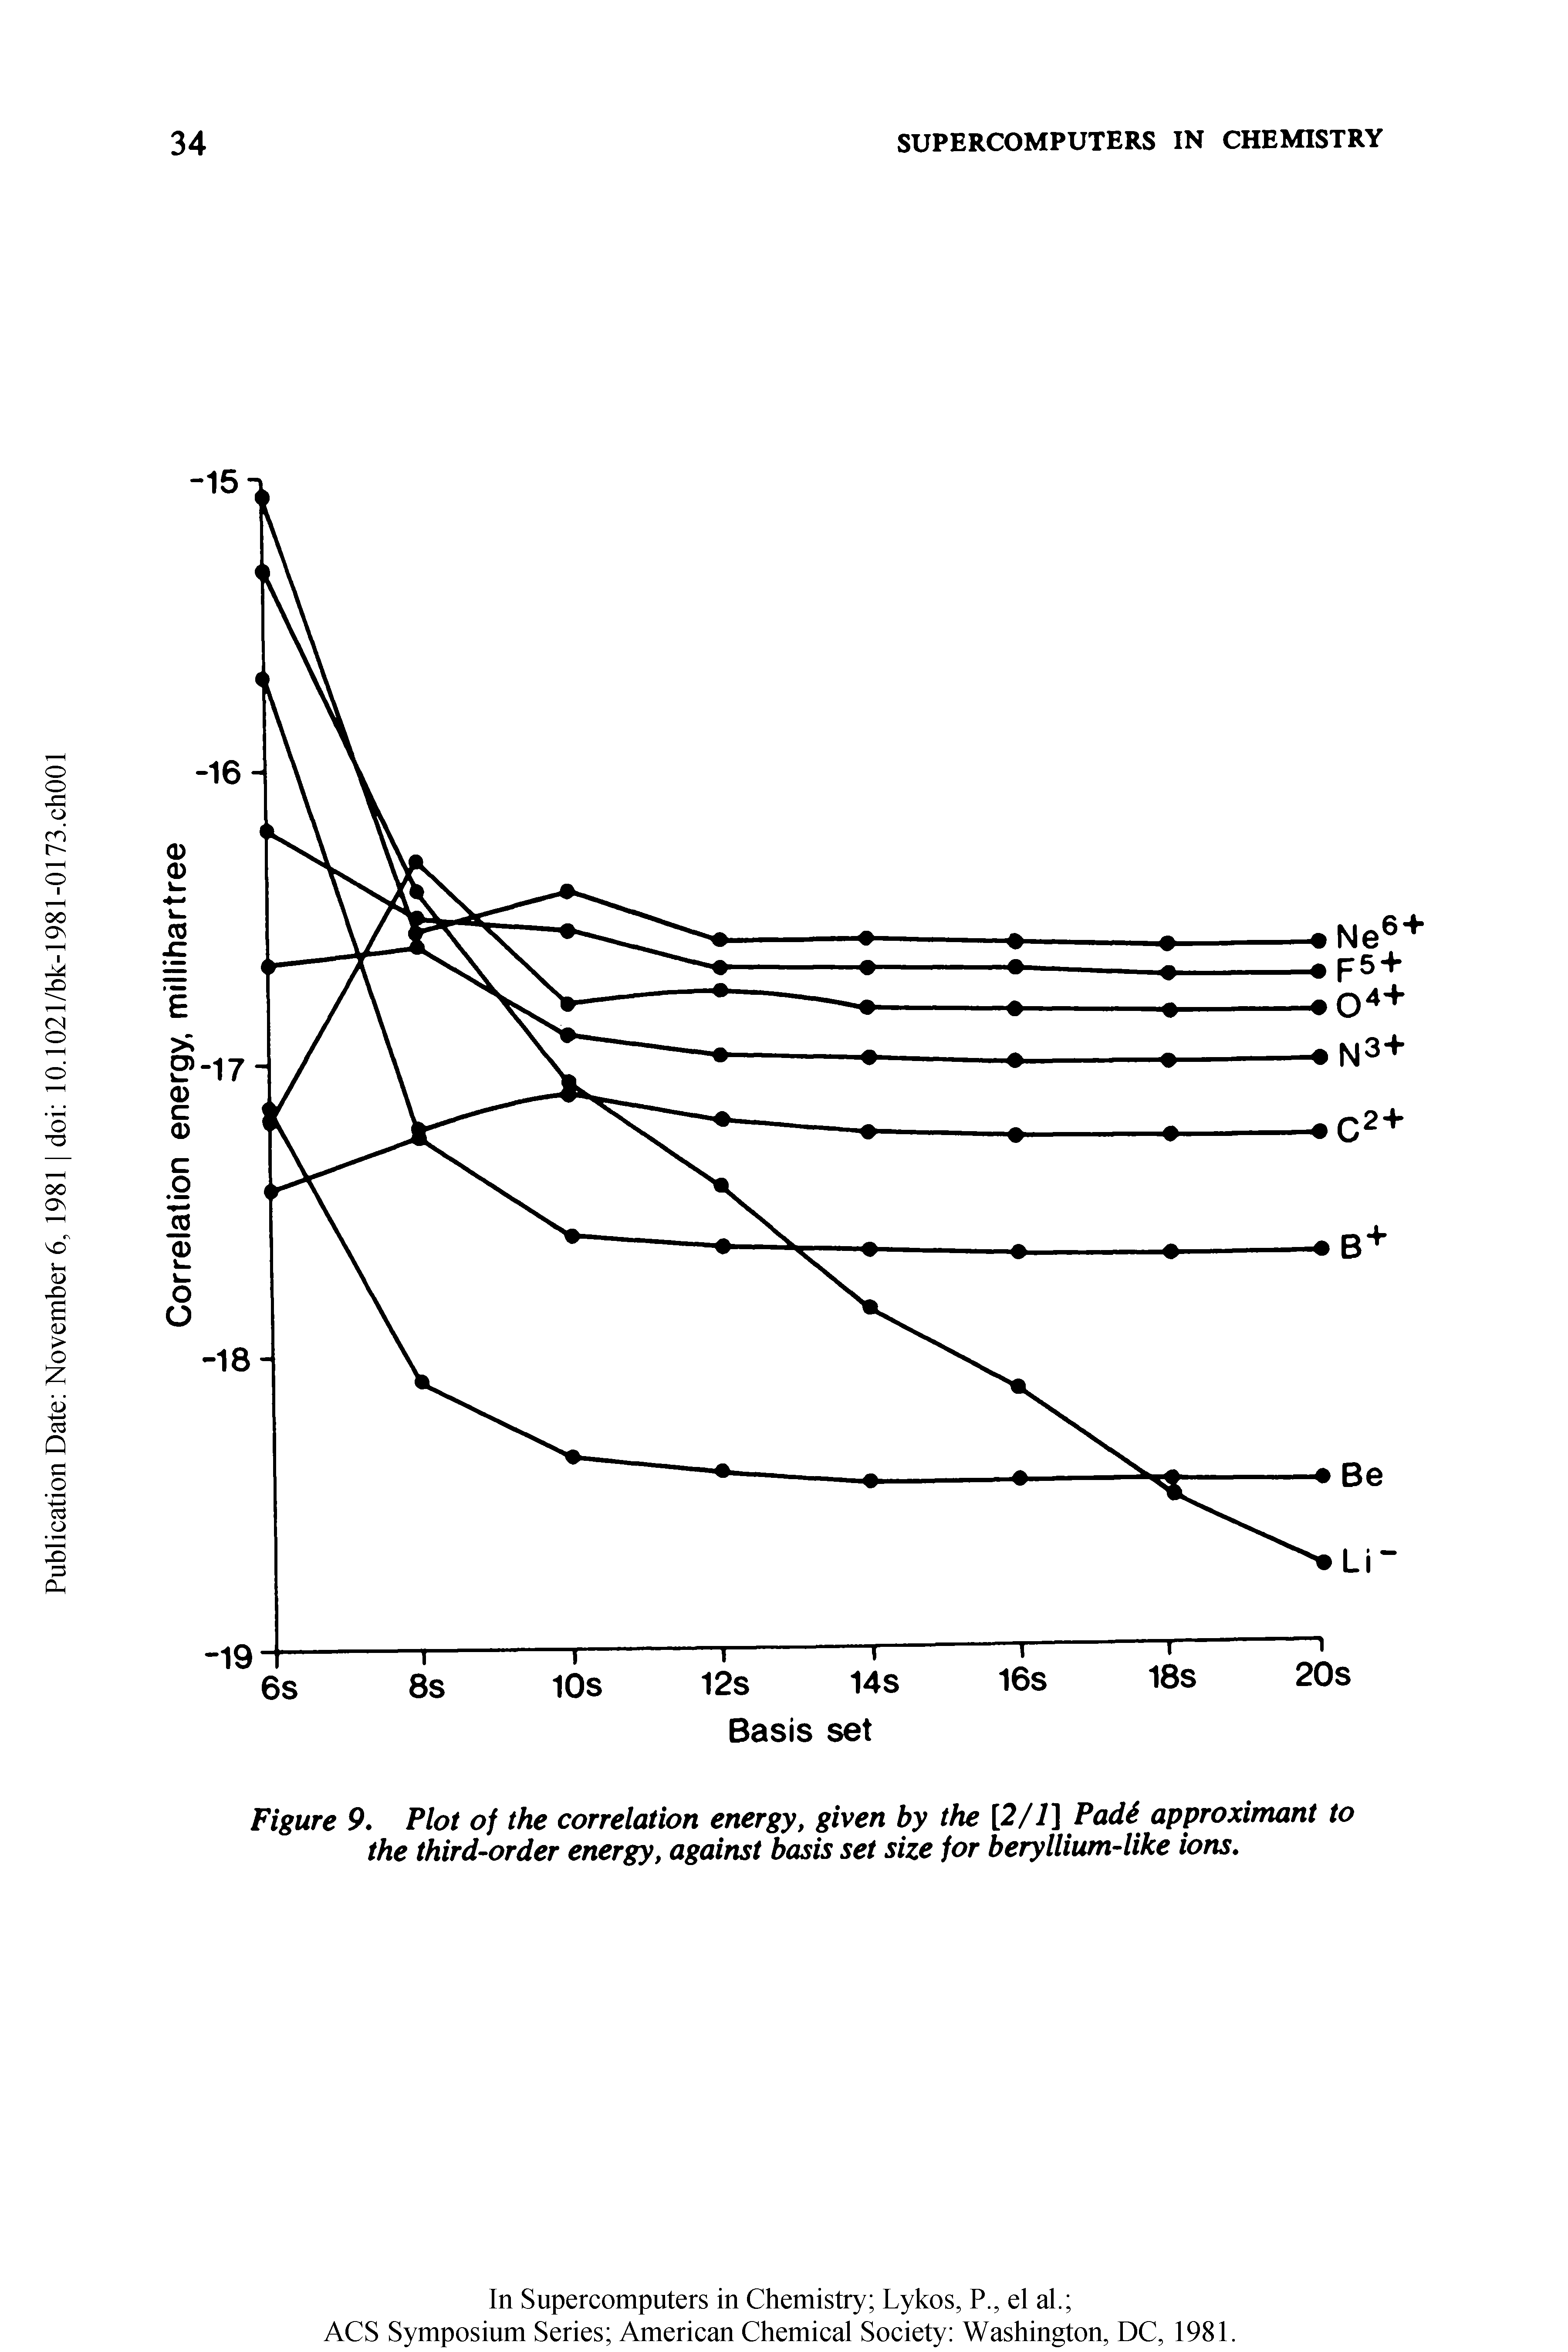 Figure 9. Plot of the correlation energy, given by the [2/1] PadS approximant to the third-order energy, against basis set size for beryllium-like ions.